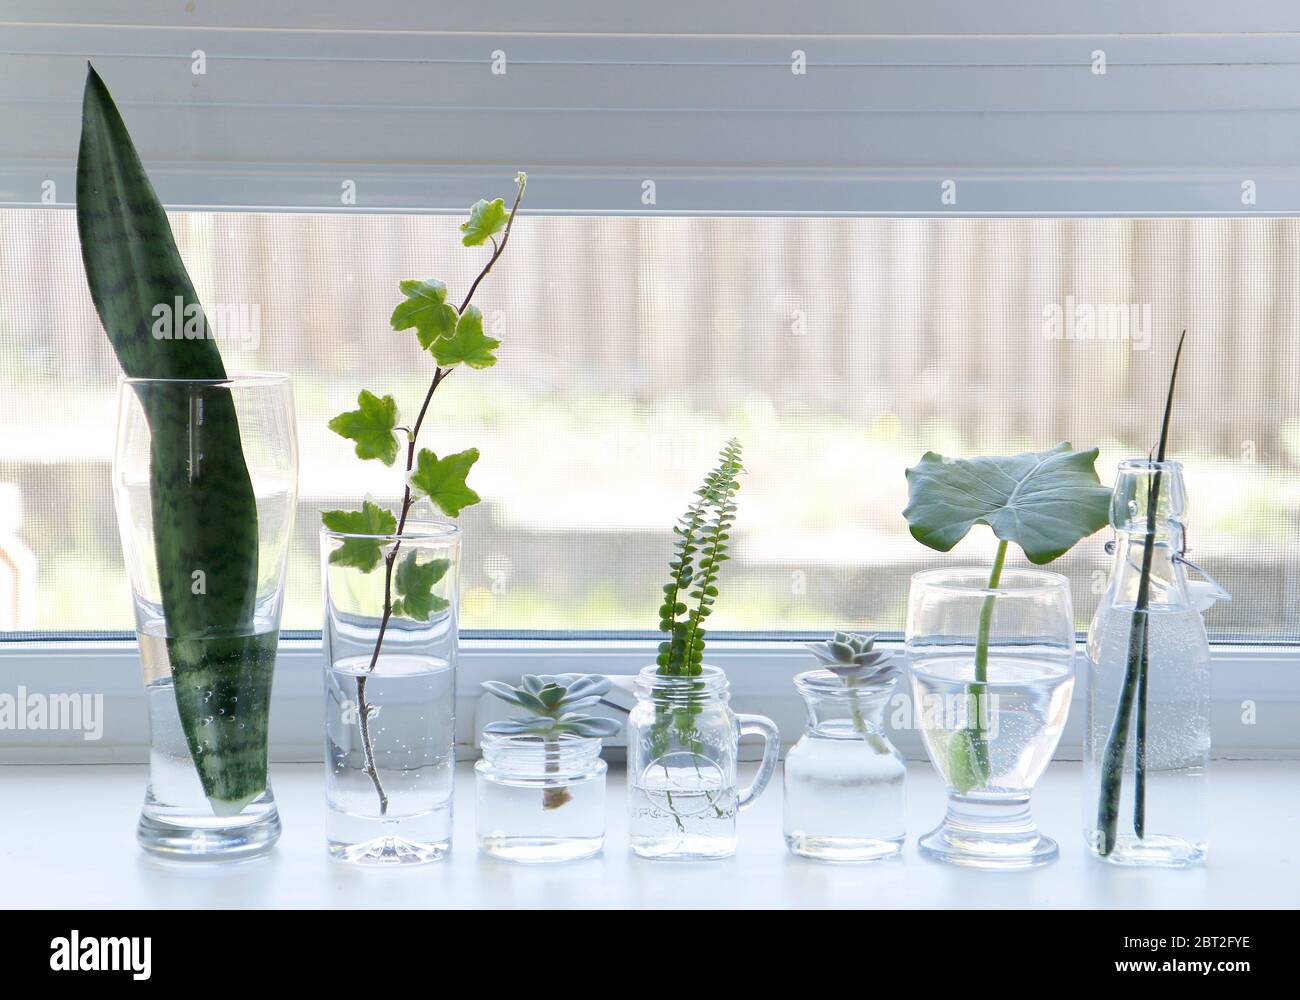 Houseplant Propagation in Water Stock Photo